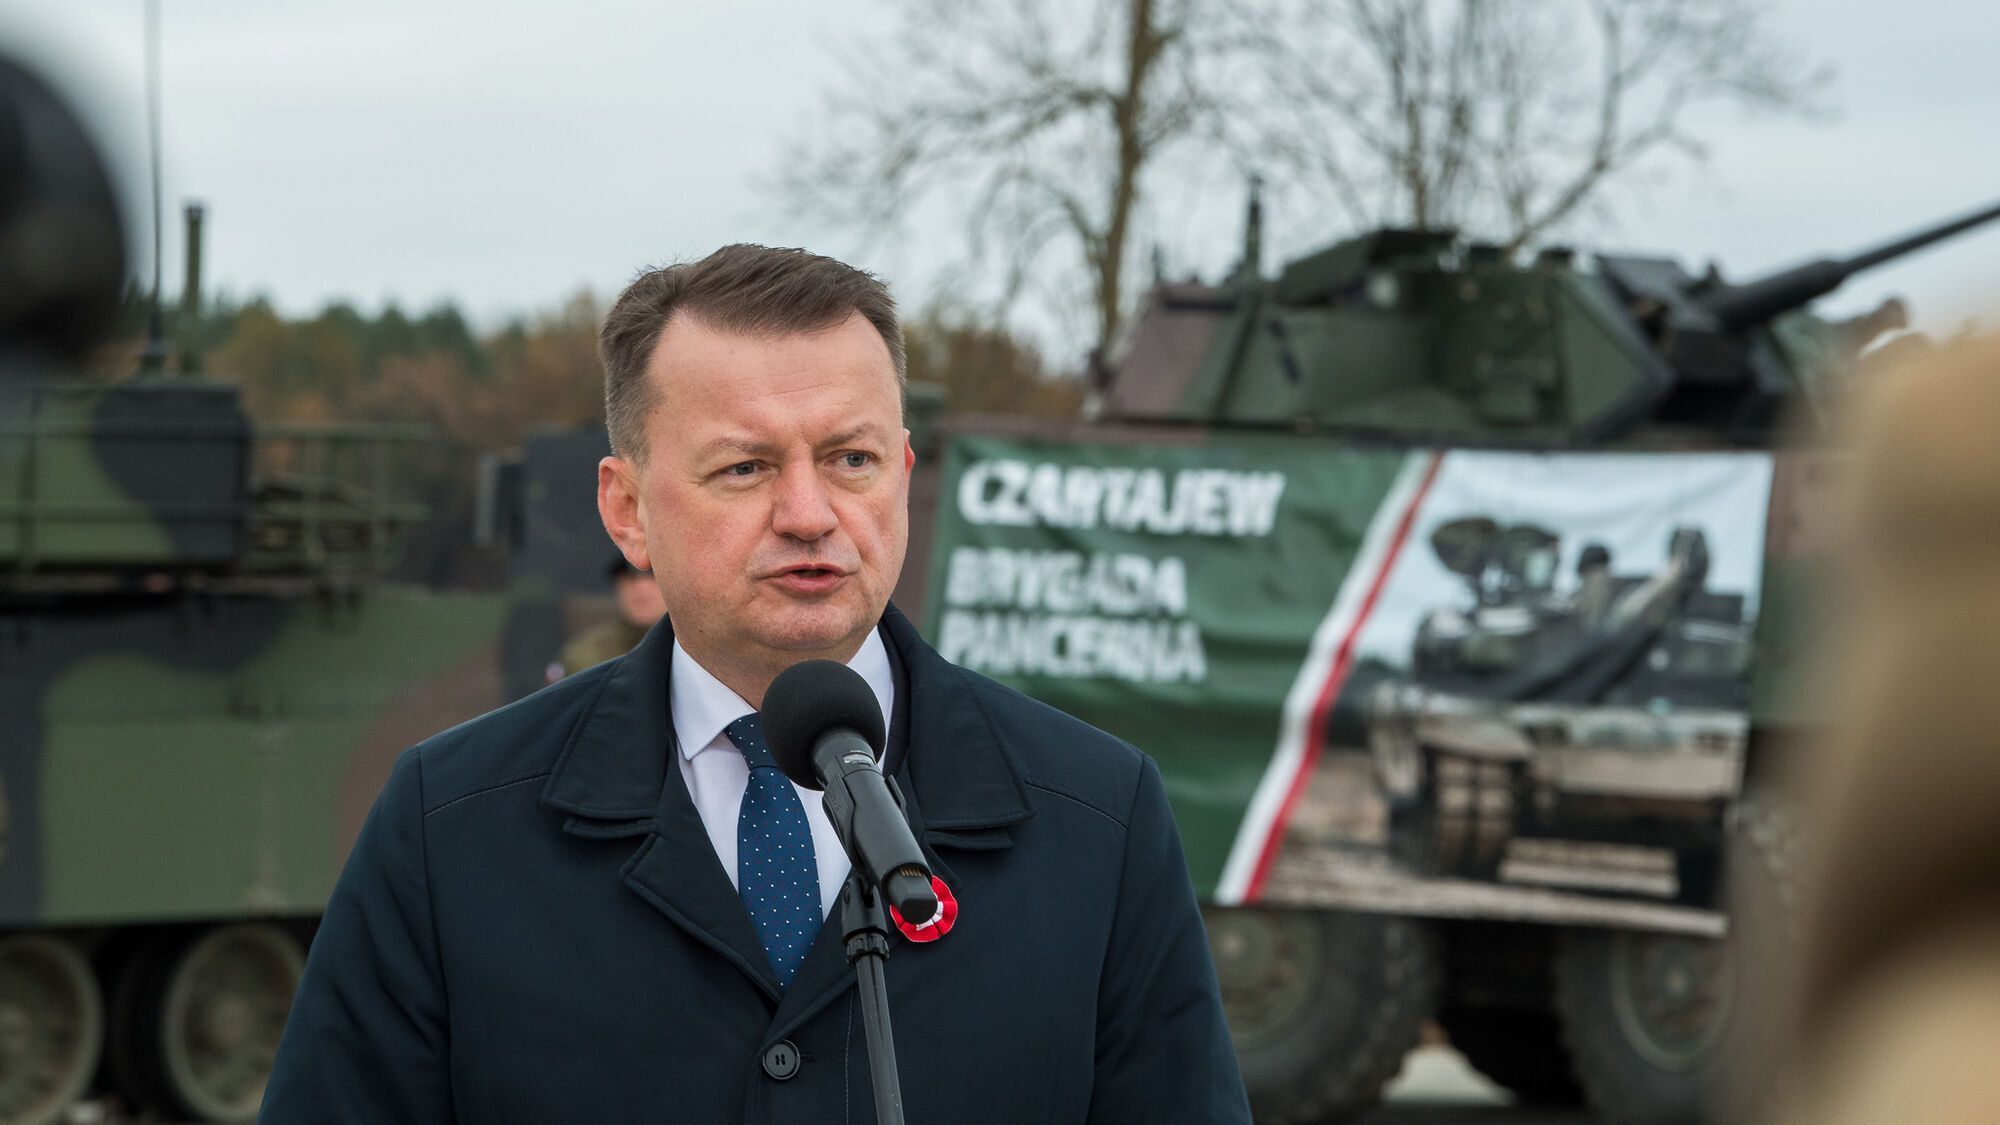 Poland deploys a new tank battalion equipped with South Korean K2 tanks near the border with Belarus